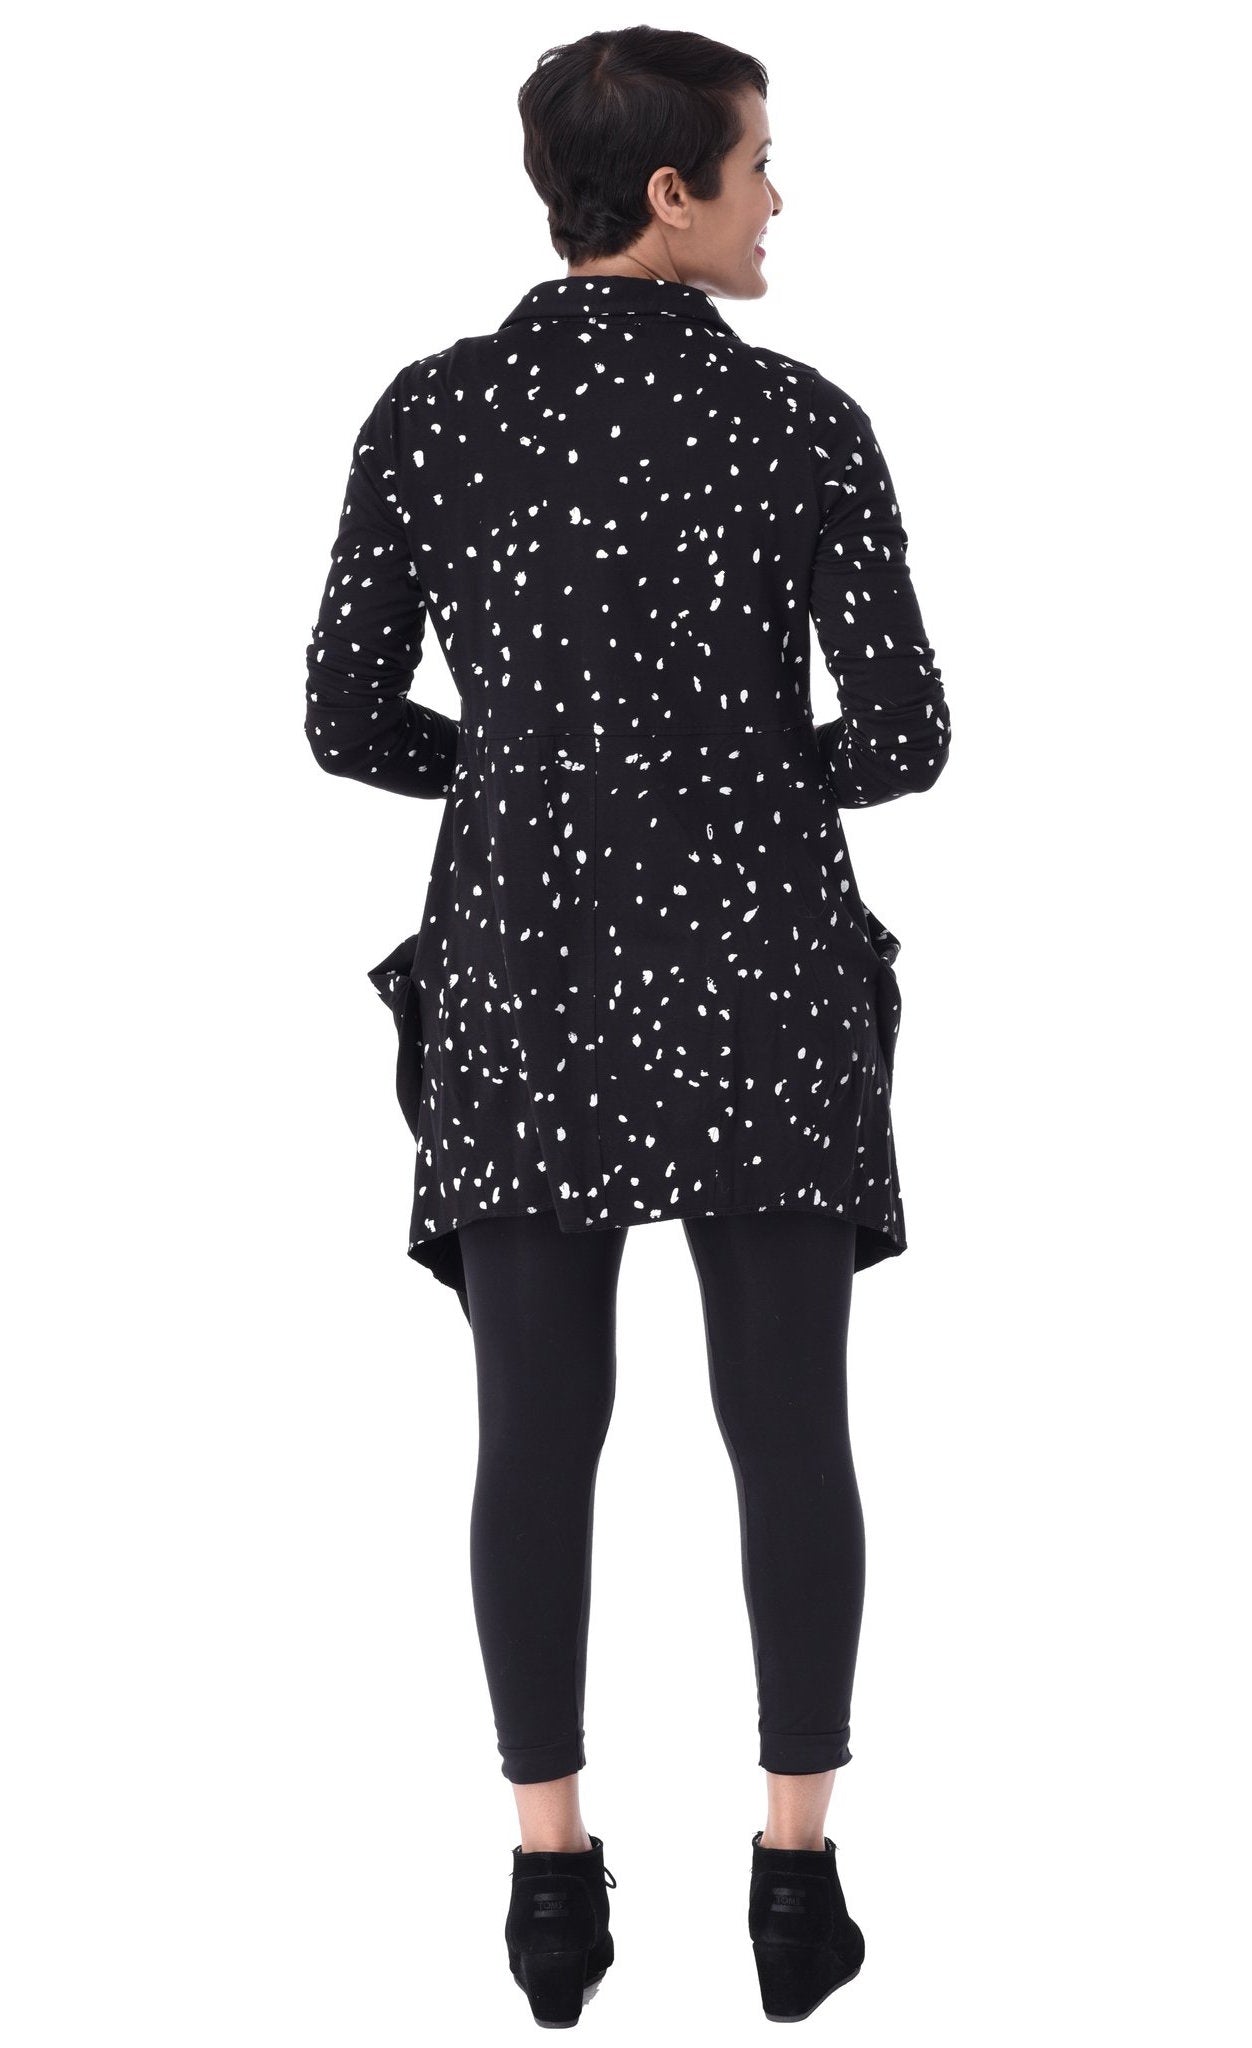 Back full body view of a woman wearing the tulip macy raindrop jacket. This jacket is black with white raindrops all over it. The sleeves are long and the top has a shorter back that sits below the hips.